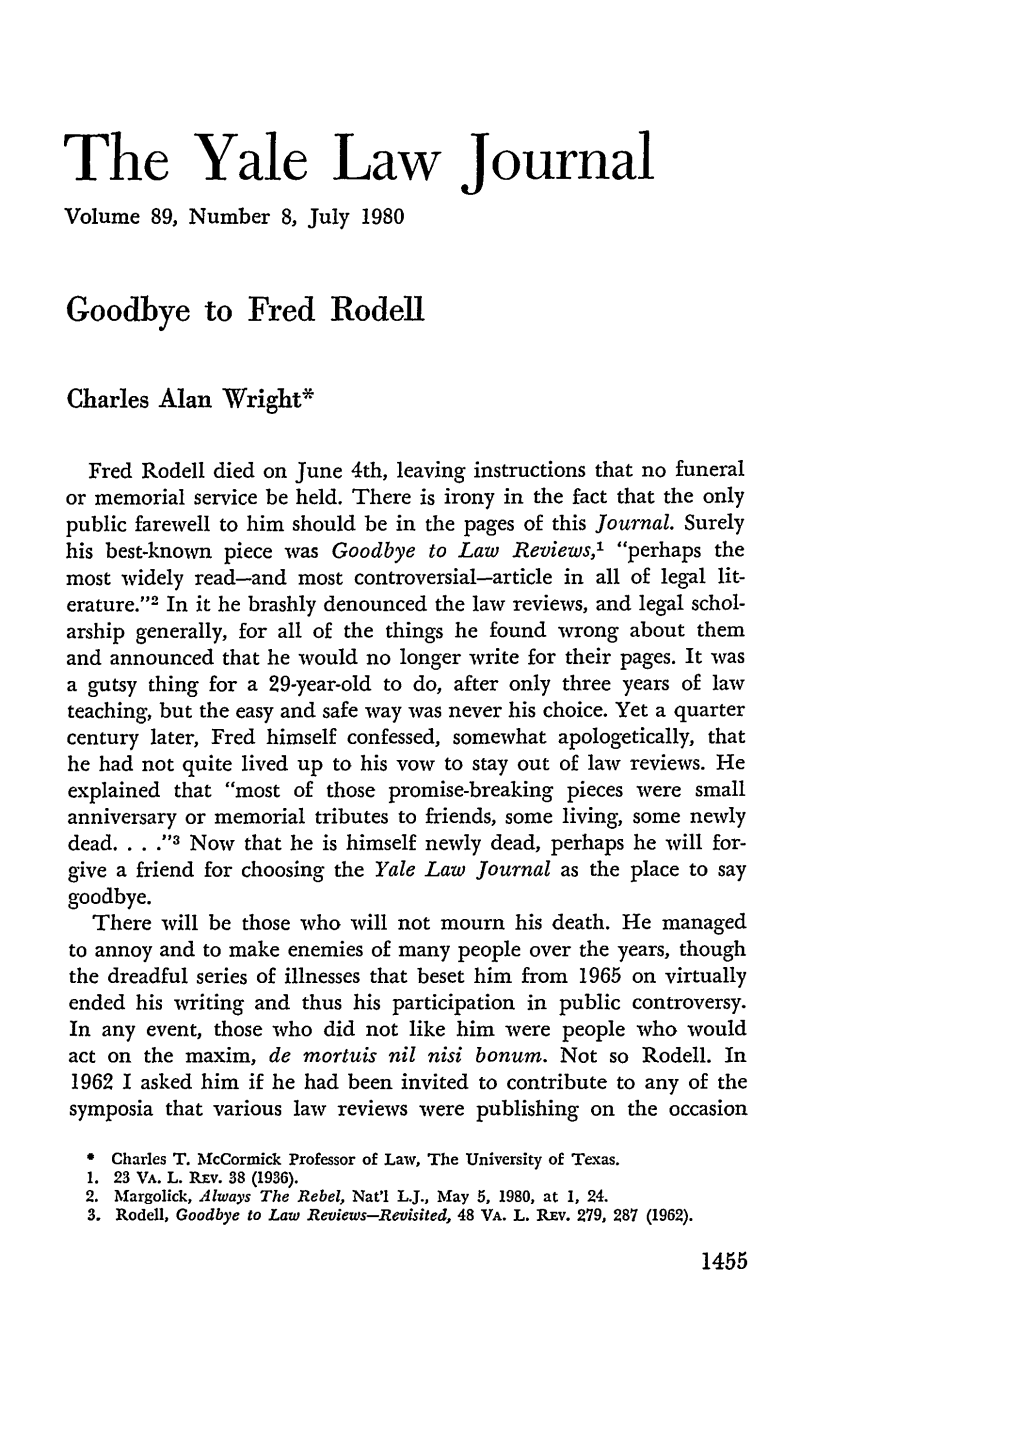 Goodbye to Fred Rodell